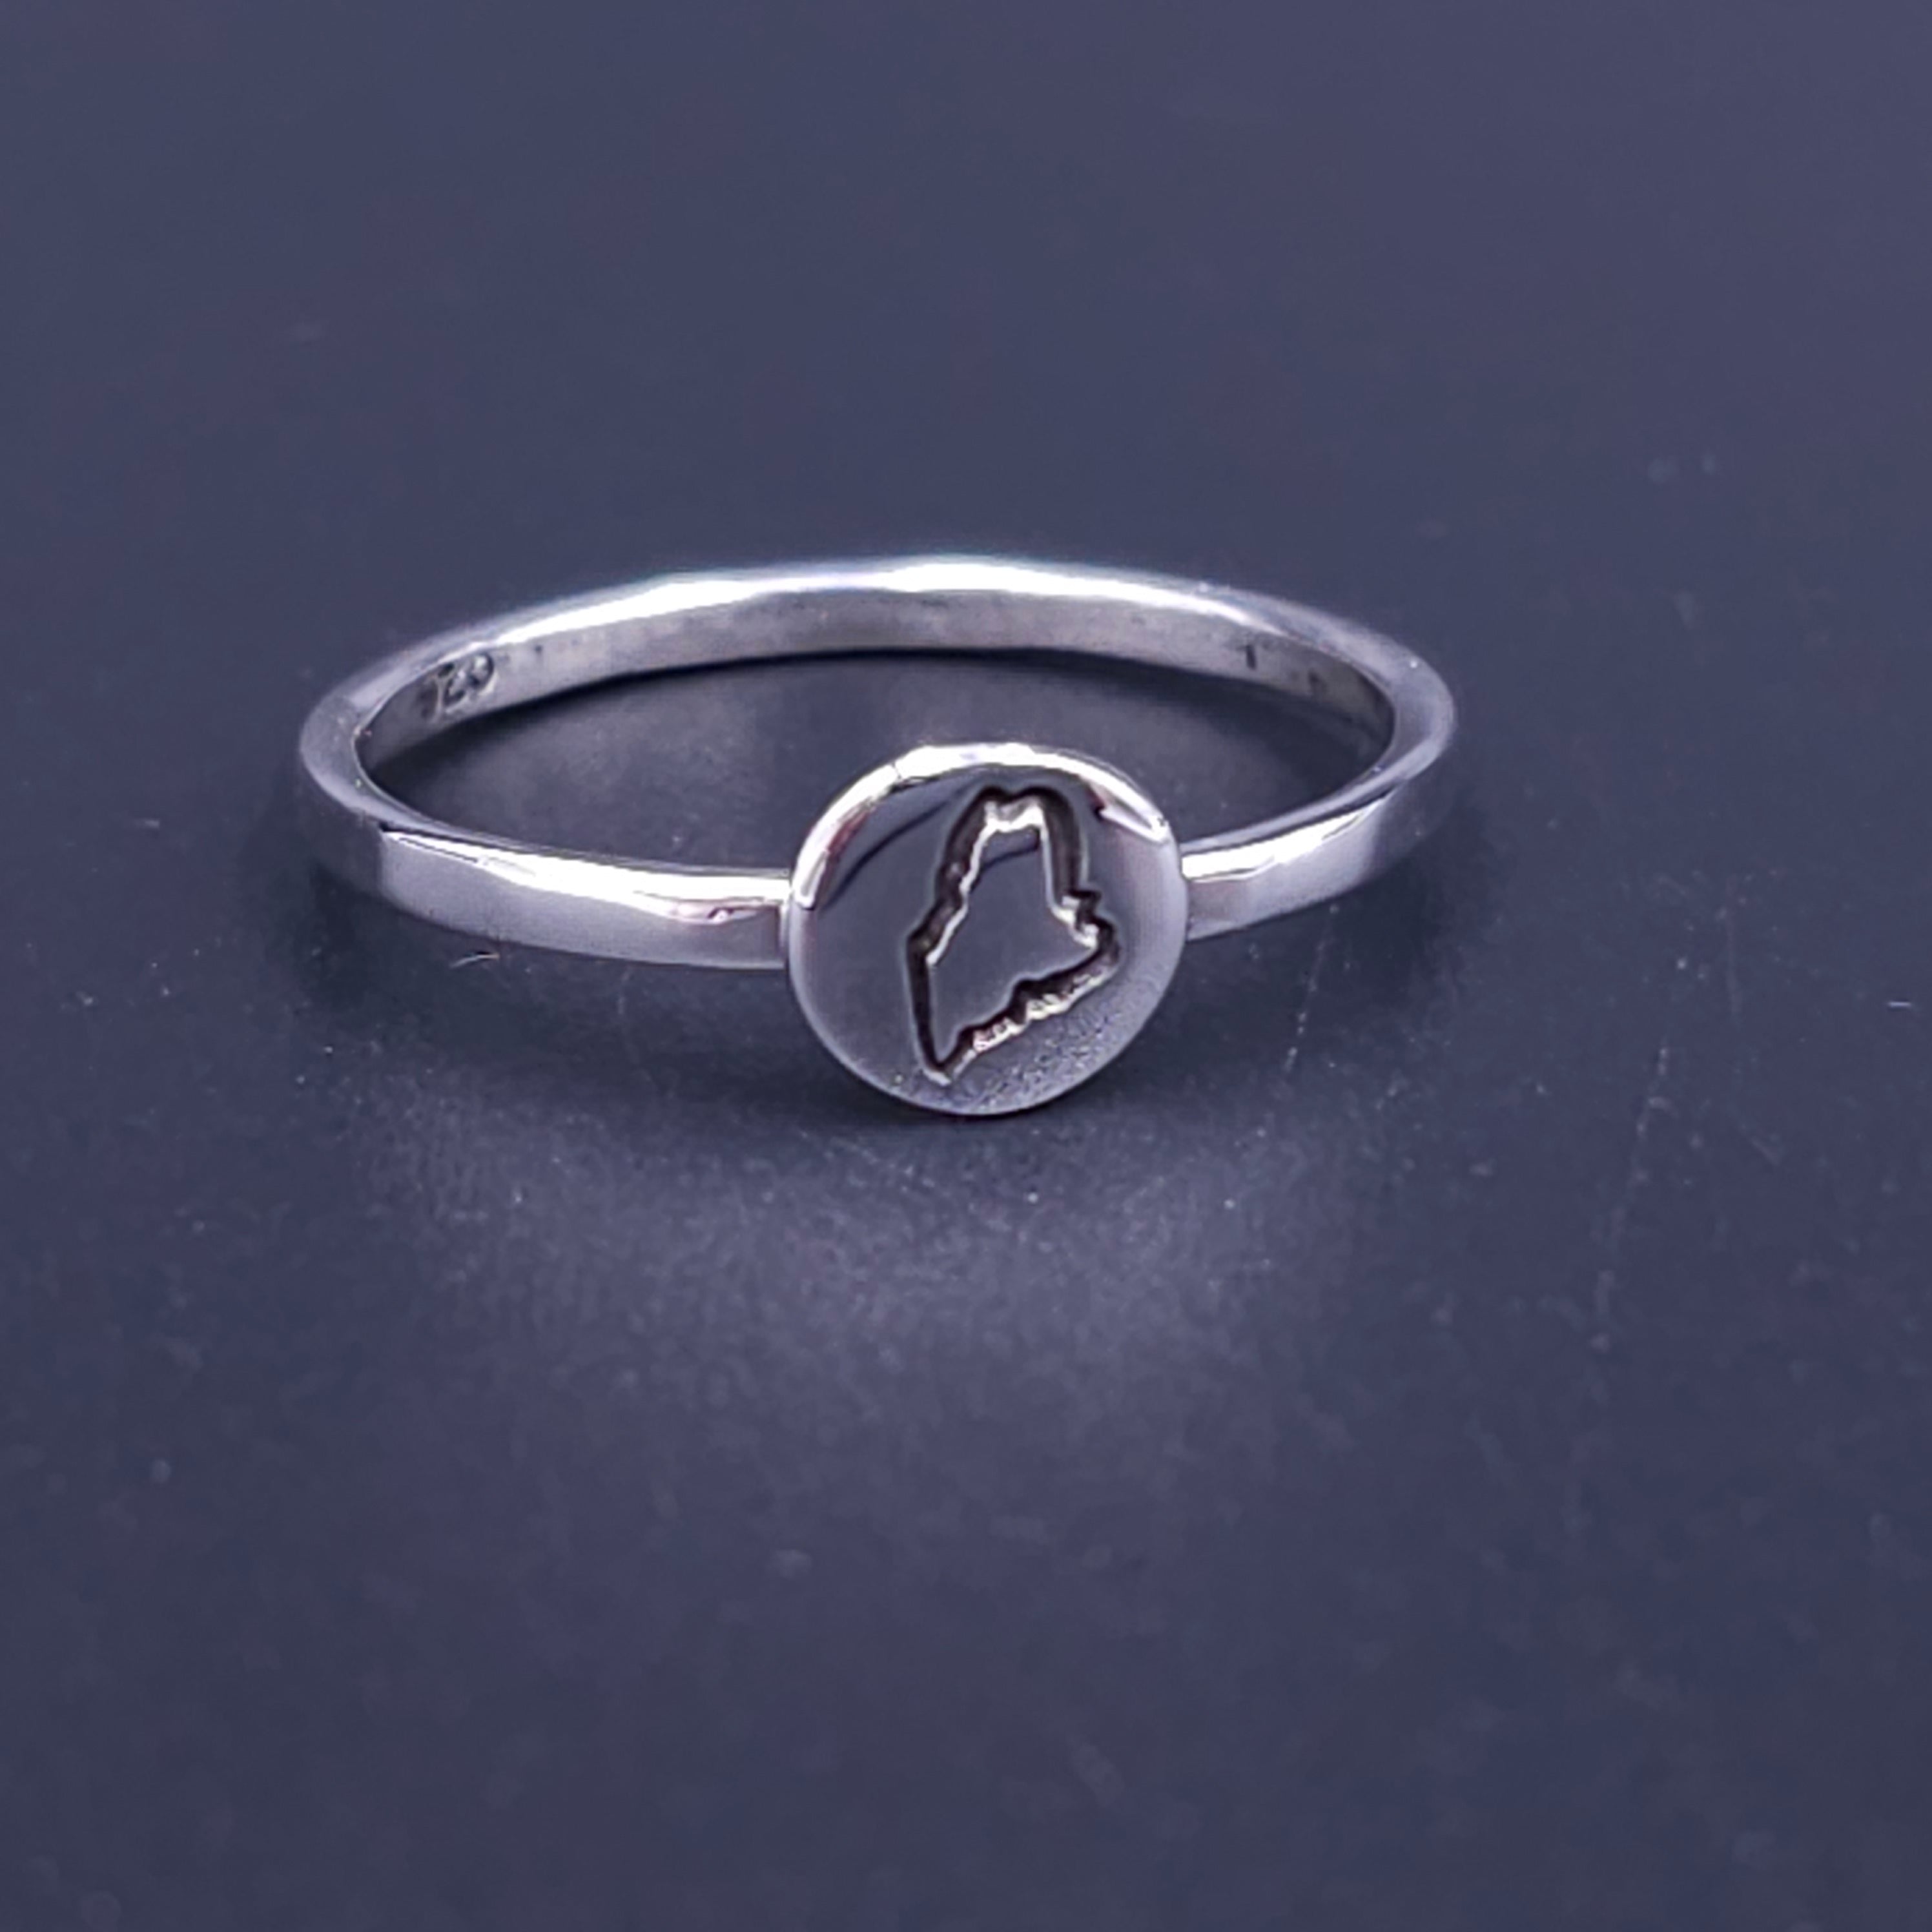 Silver ring with circle on top with the outline of the state of Maine